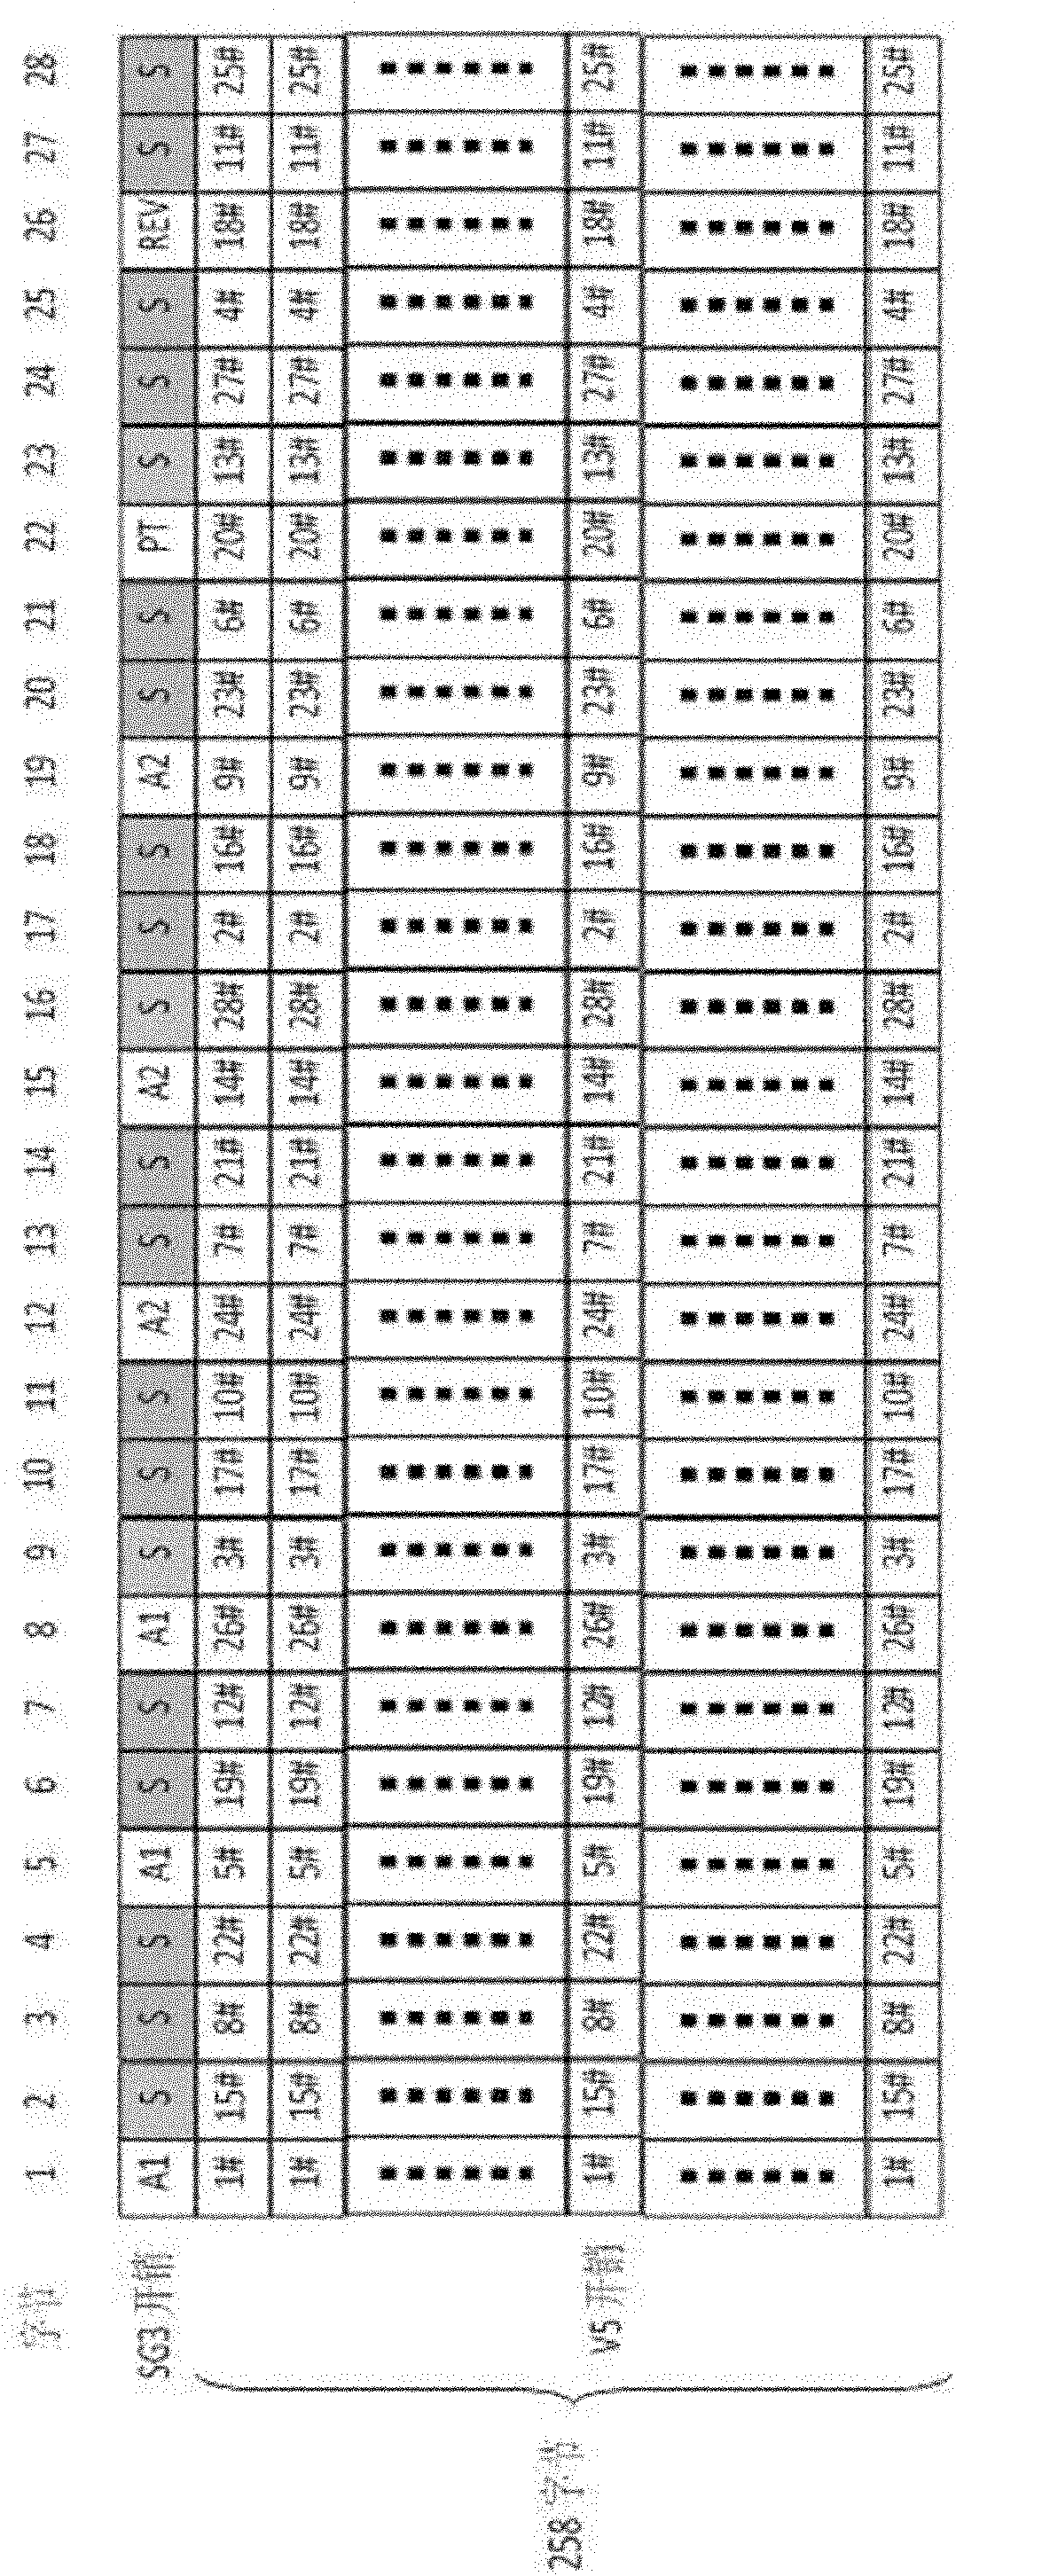 Enhancement-type PDH (plesiochronous digital hierarchy) frame format suitable for microwave communication and mapping method